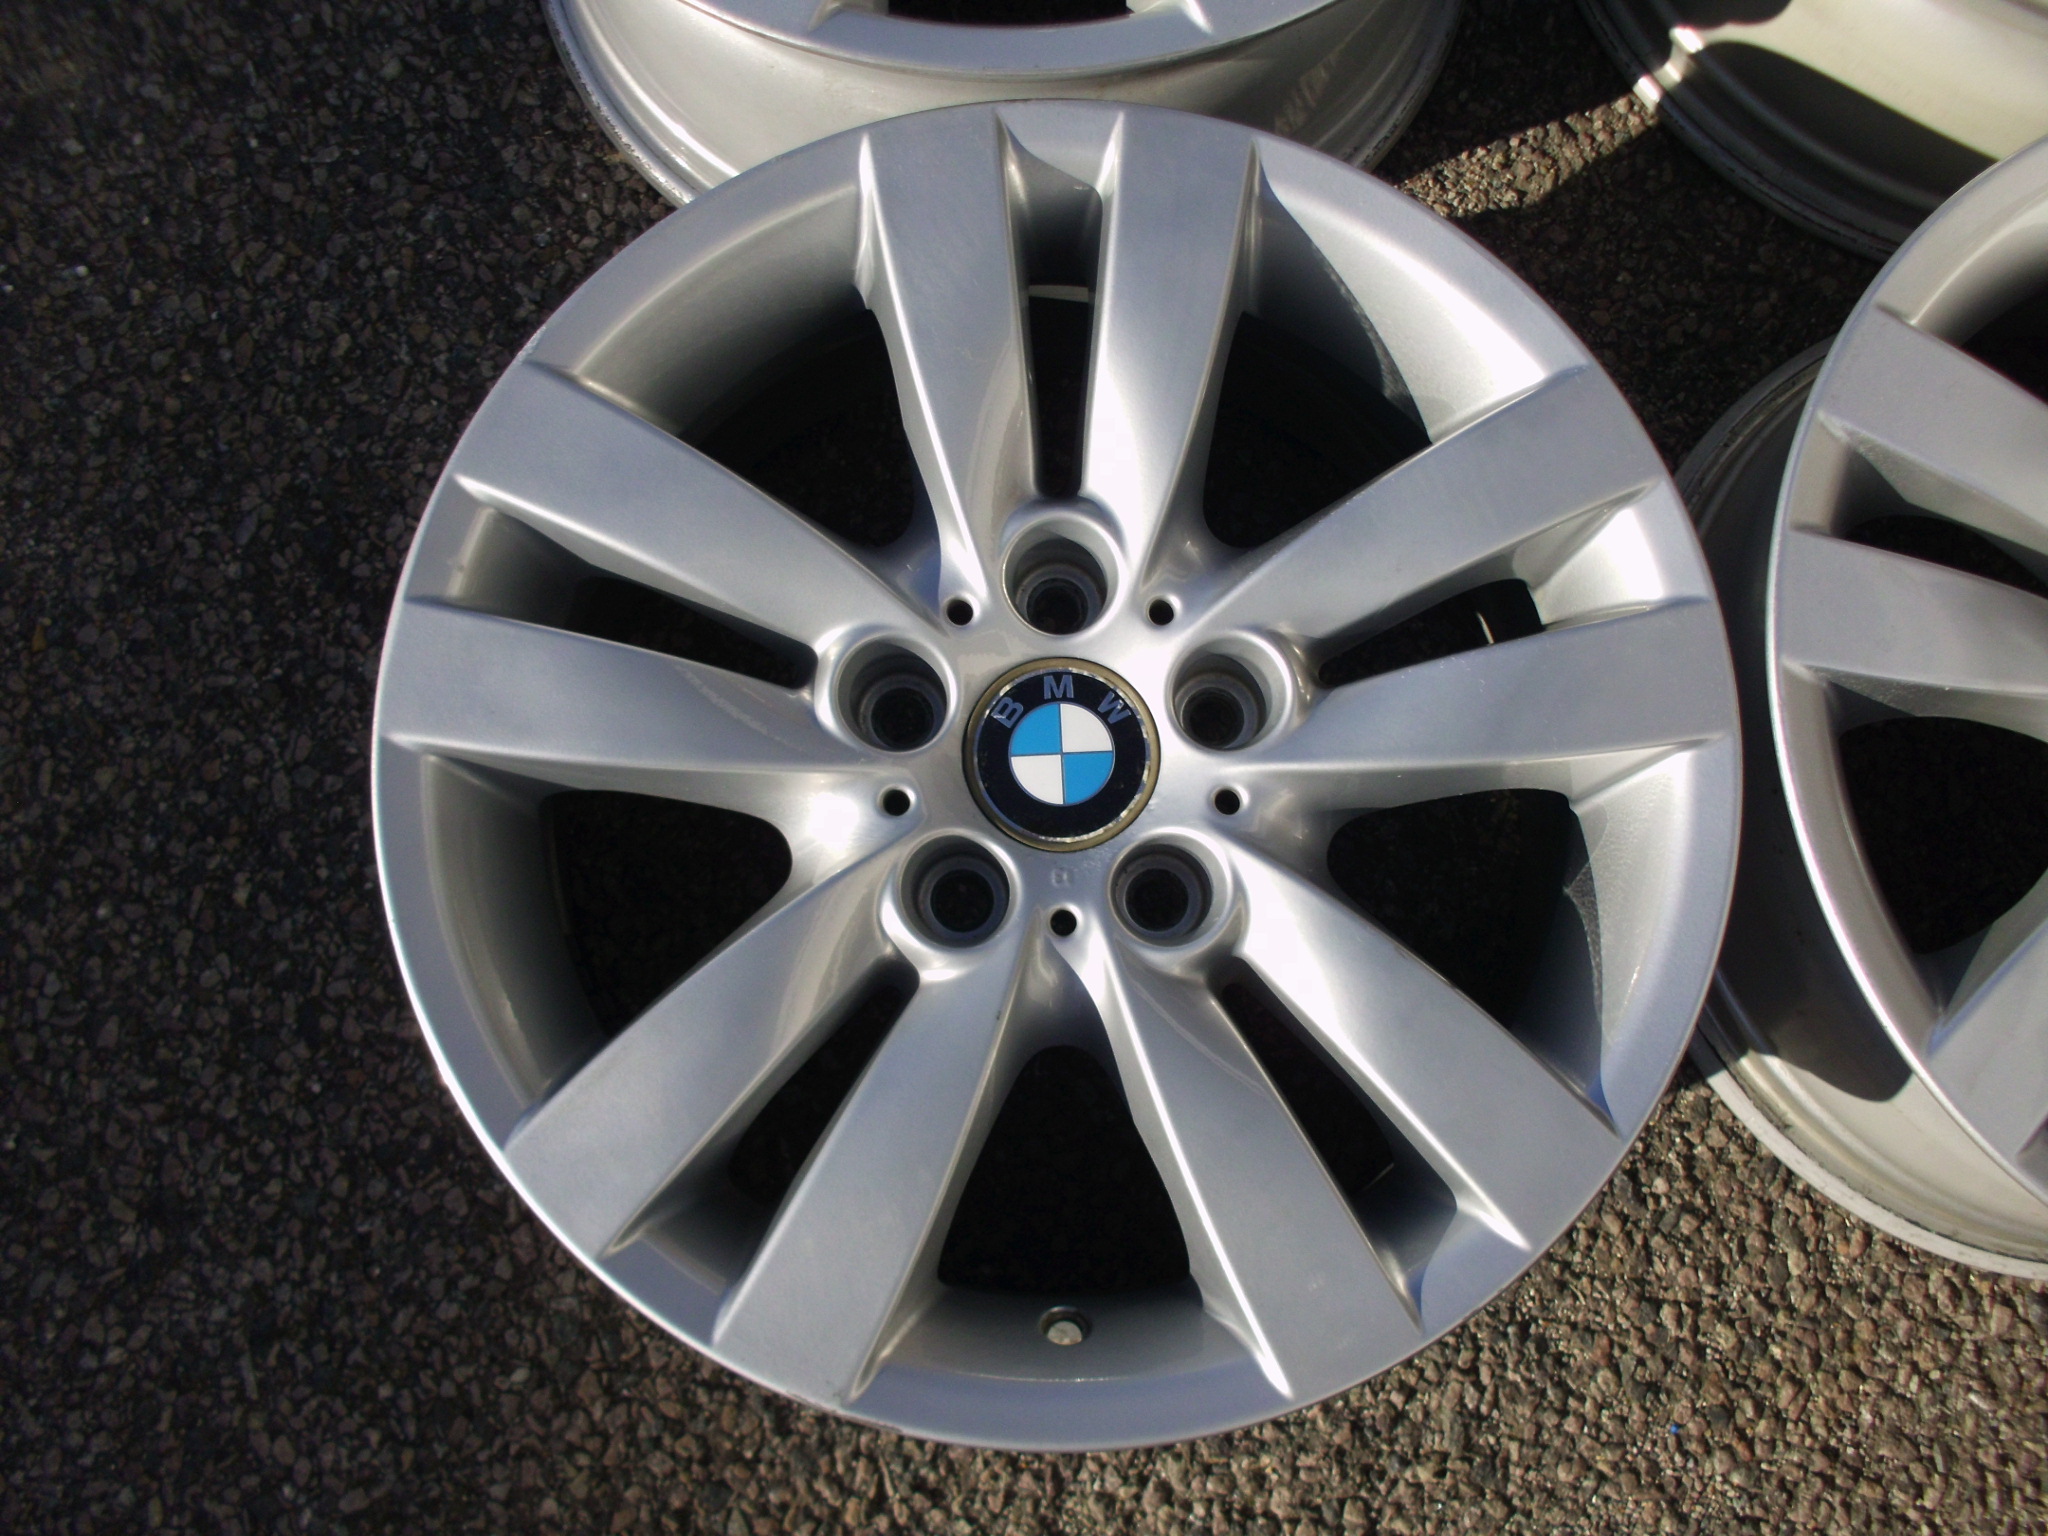 USED 17" GENUINE BMW STYLE 161 E9X DOUBLE SPOKE ALLOY WHEELS, WIDER REAR, GOOD CONDITION